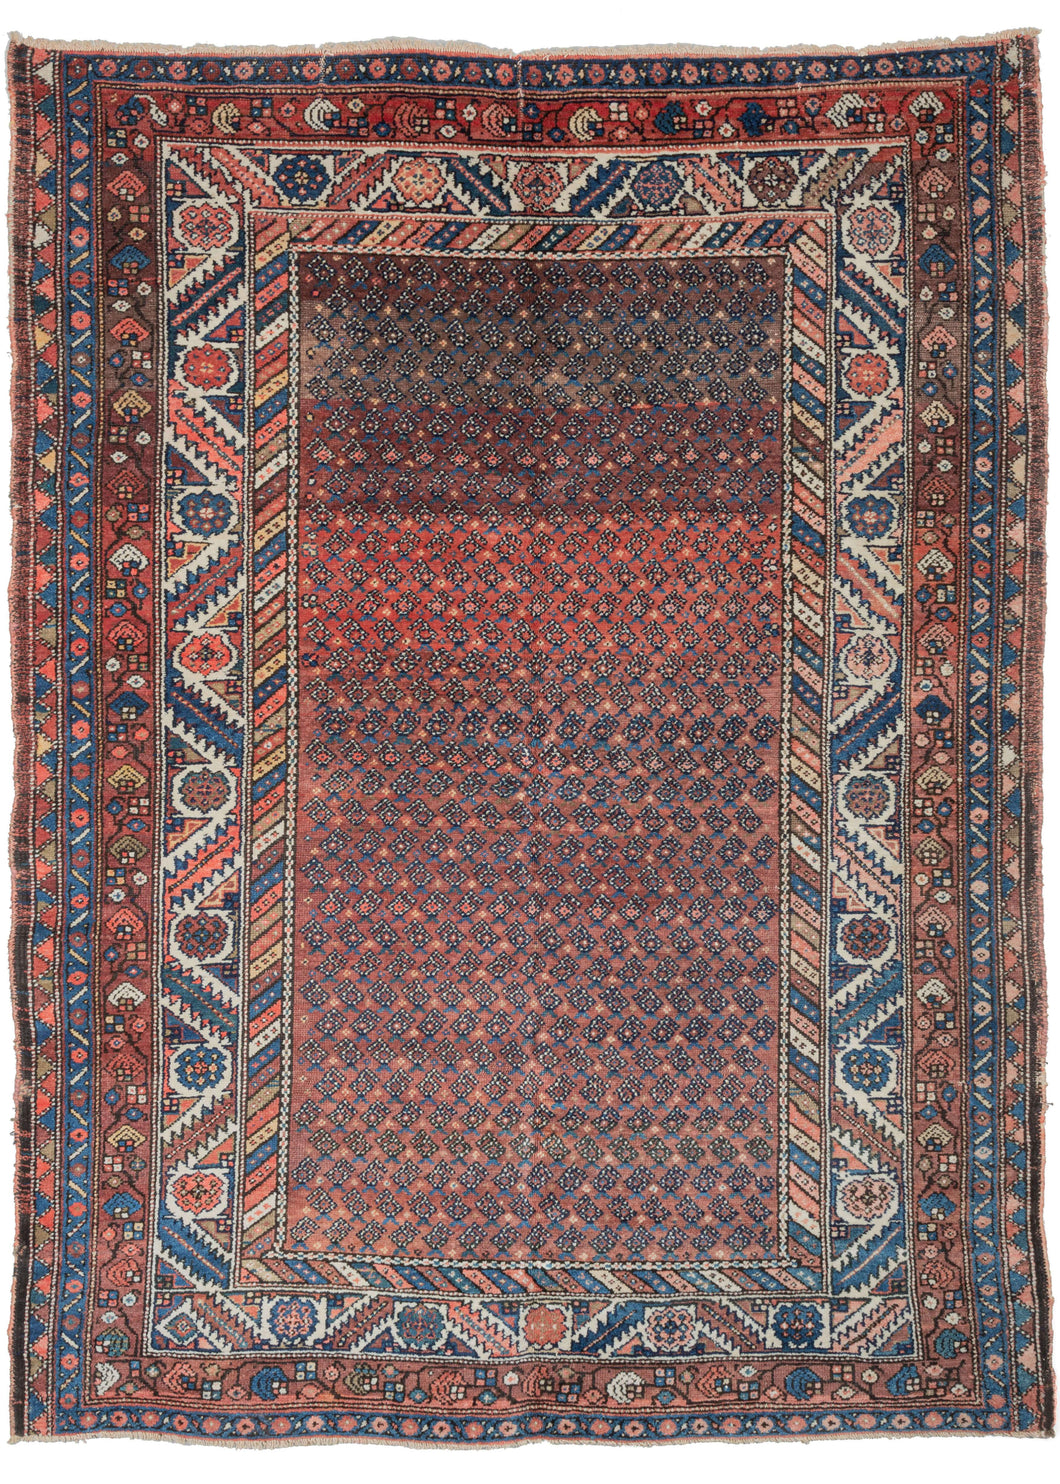 Antique W Persiann Malayer area rug featuring an all over pattern of small botehs on a red field with substantial and stunning abrash, the natural striations that occur when wool is dyed in small batches. The five borders include larger scale geometric designs in blues and reds on ivory fields which provide a nice contrast to the smaller central design.